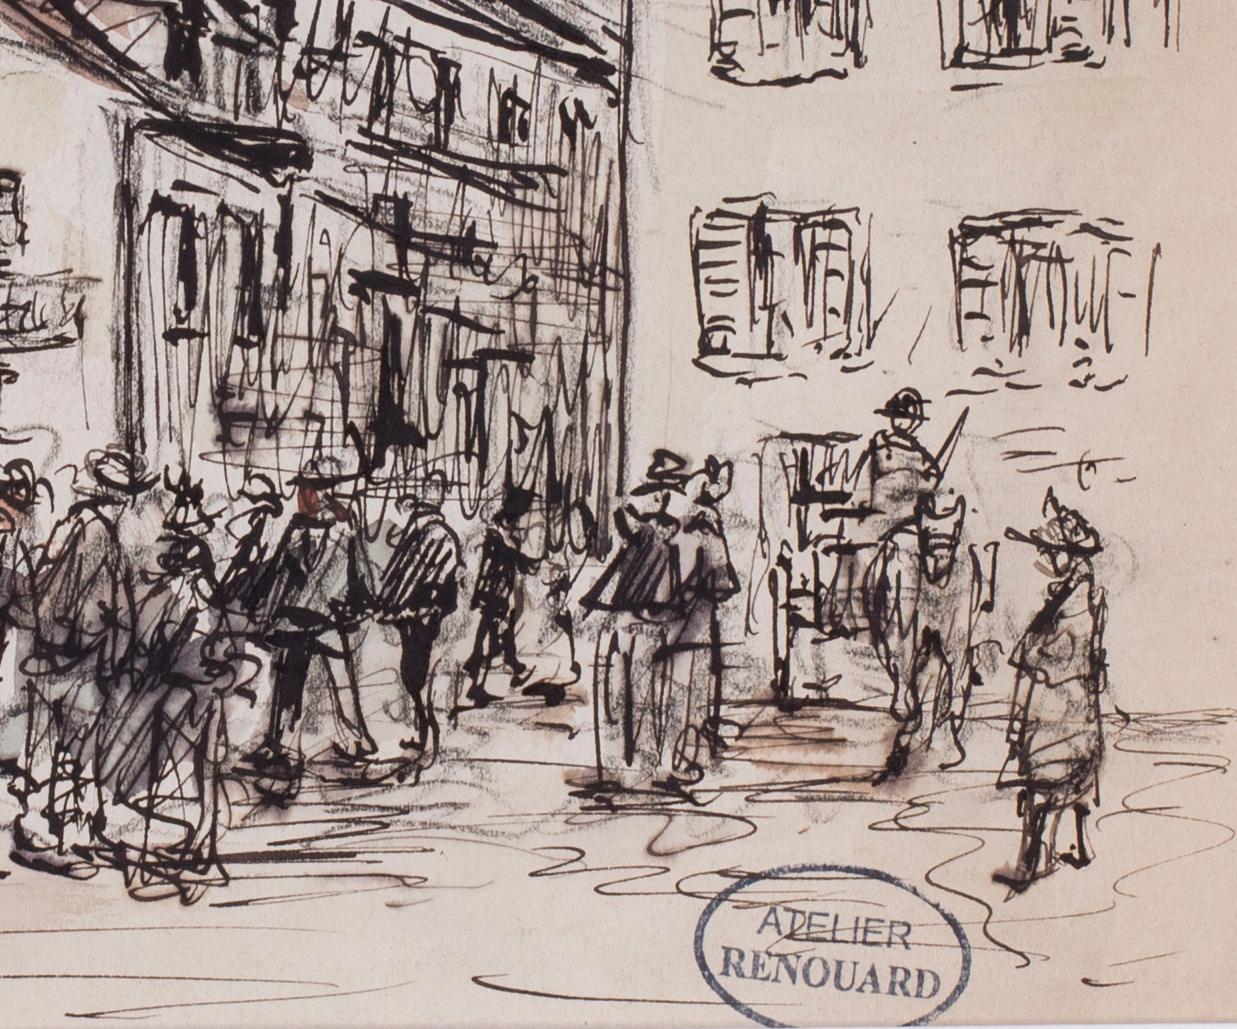 Charles Paul Renouard (French, 1845 – 1921)
A gathering in a market town
Ink and watercolour on paper
6.1/2 x 9.5/8in. (16 x 24.5cm.)
Signed with an atelier stamp (lower right)
